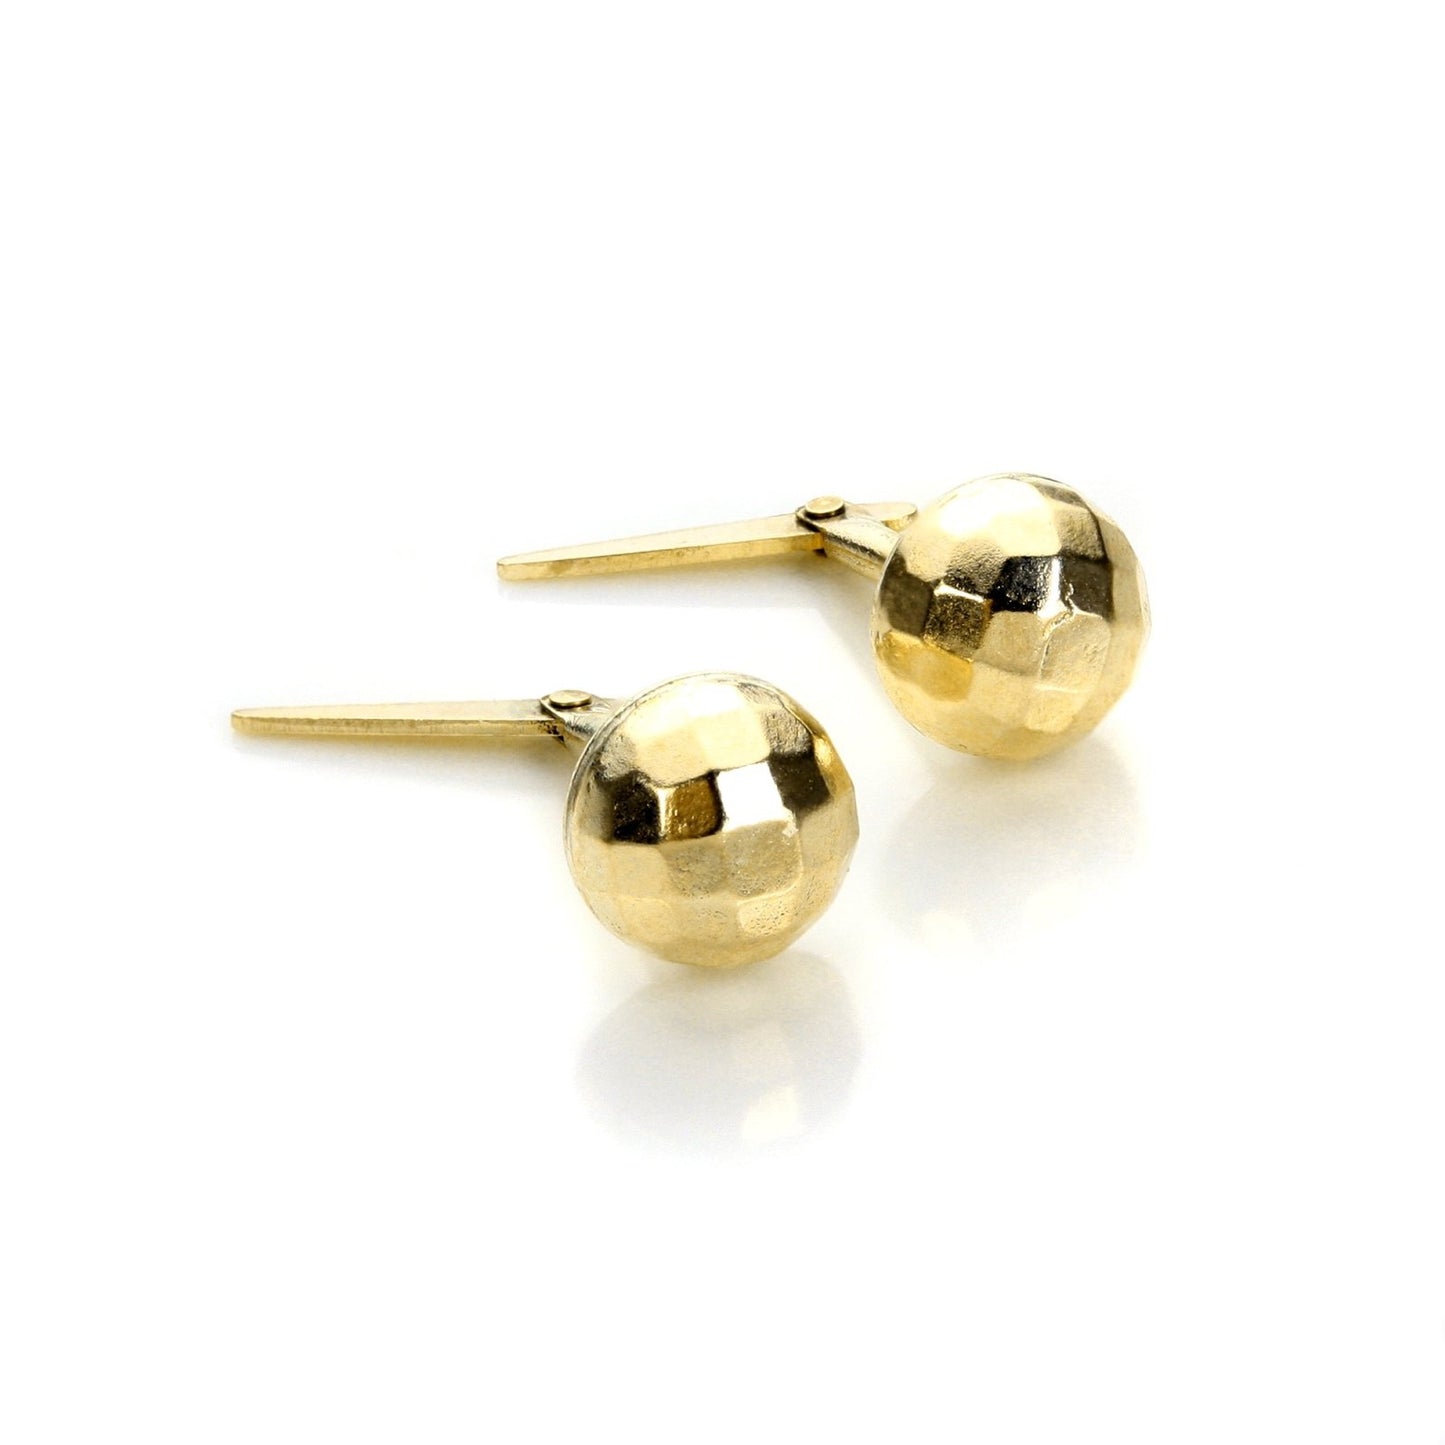 Andralok 9ct Yellow Gold Small Faceted Stud Earrings - jewellerybox